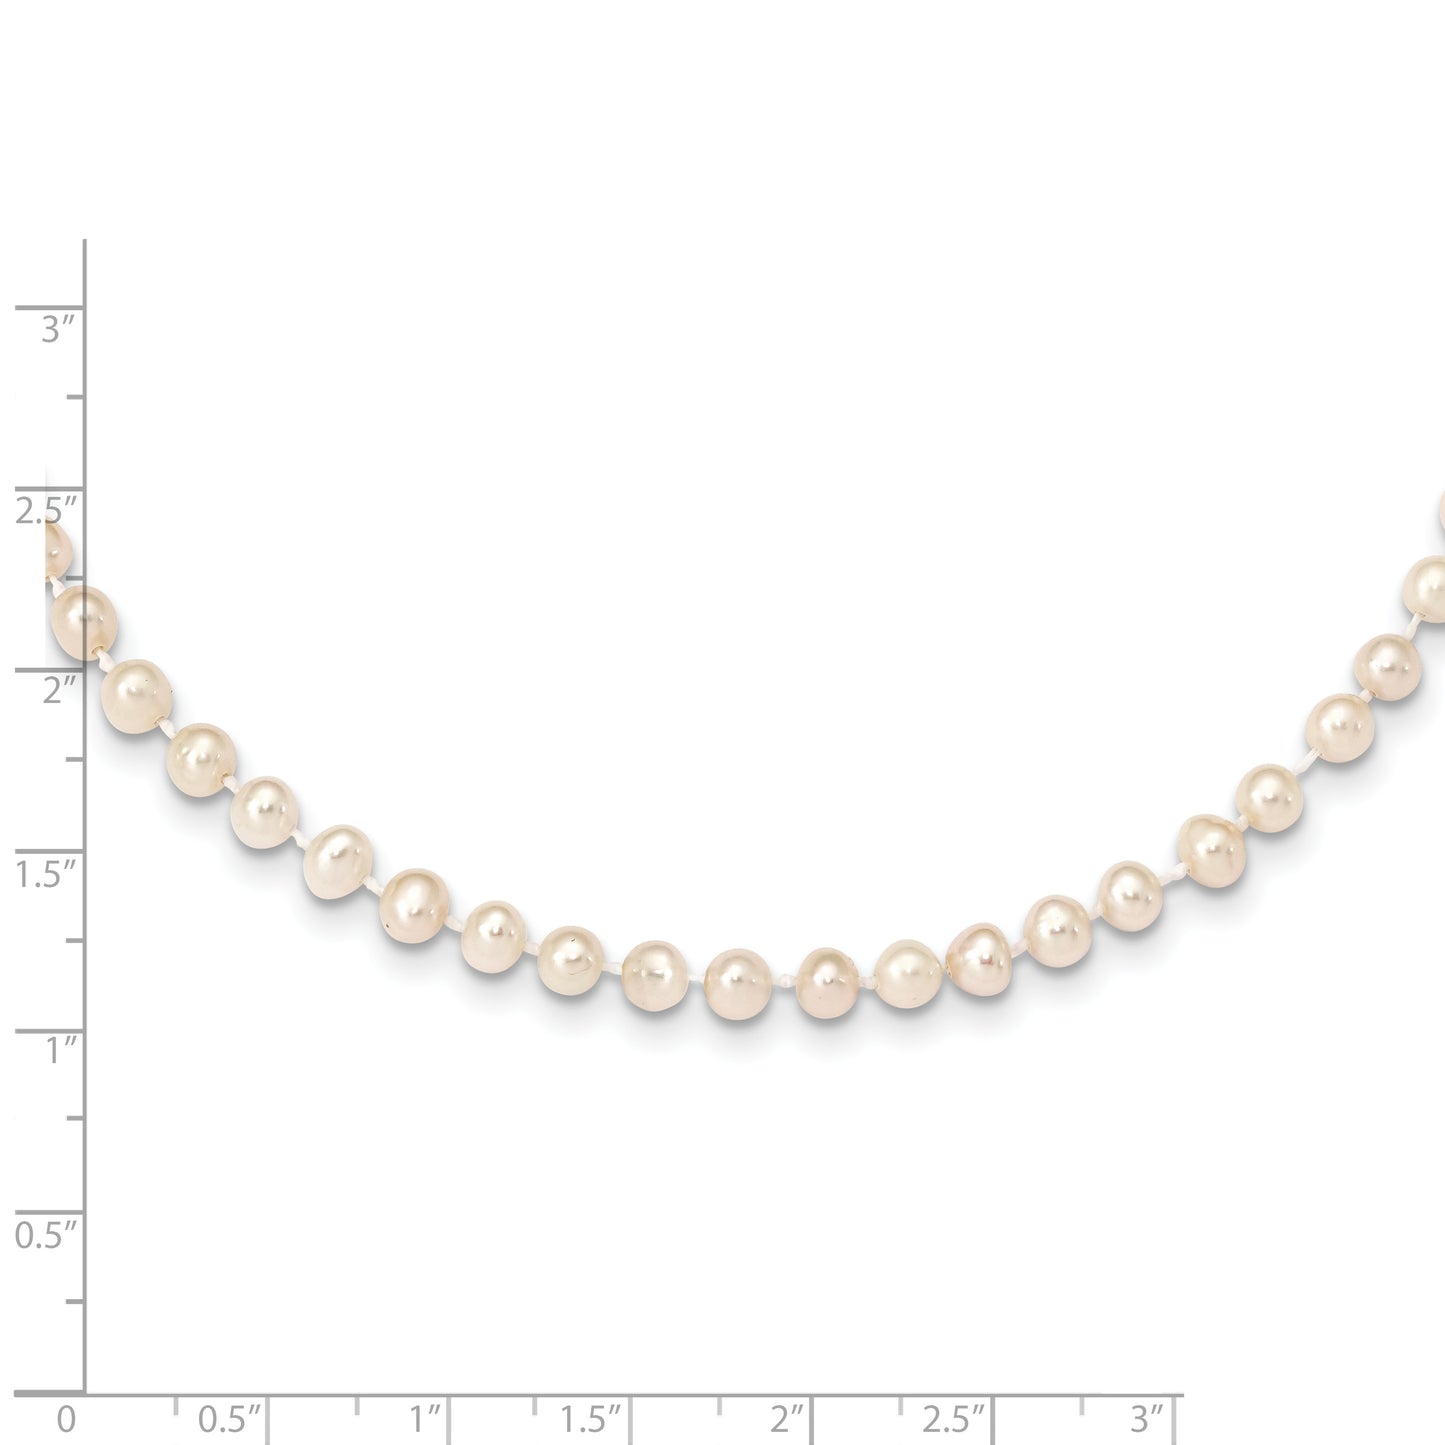 14k 4-5mm White Near Round Freshwater Cultured Pearl Necklace